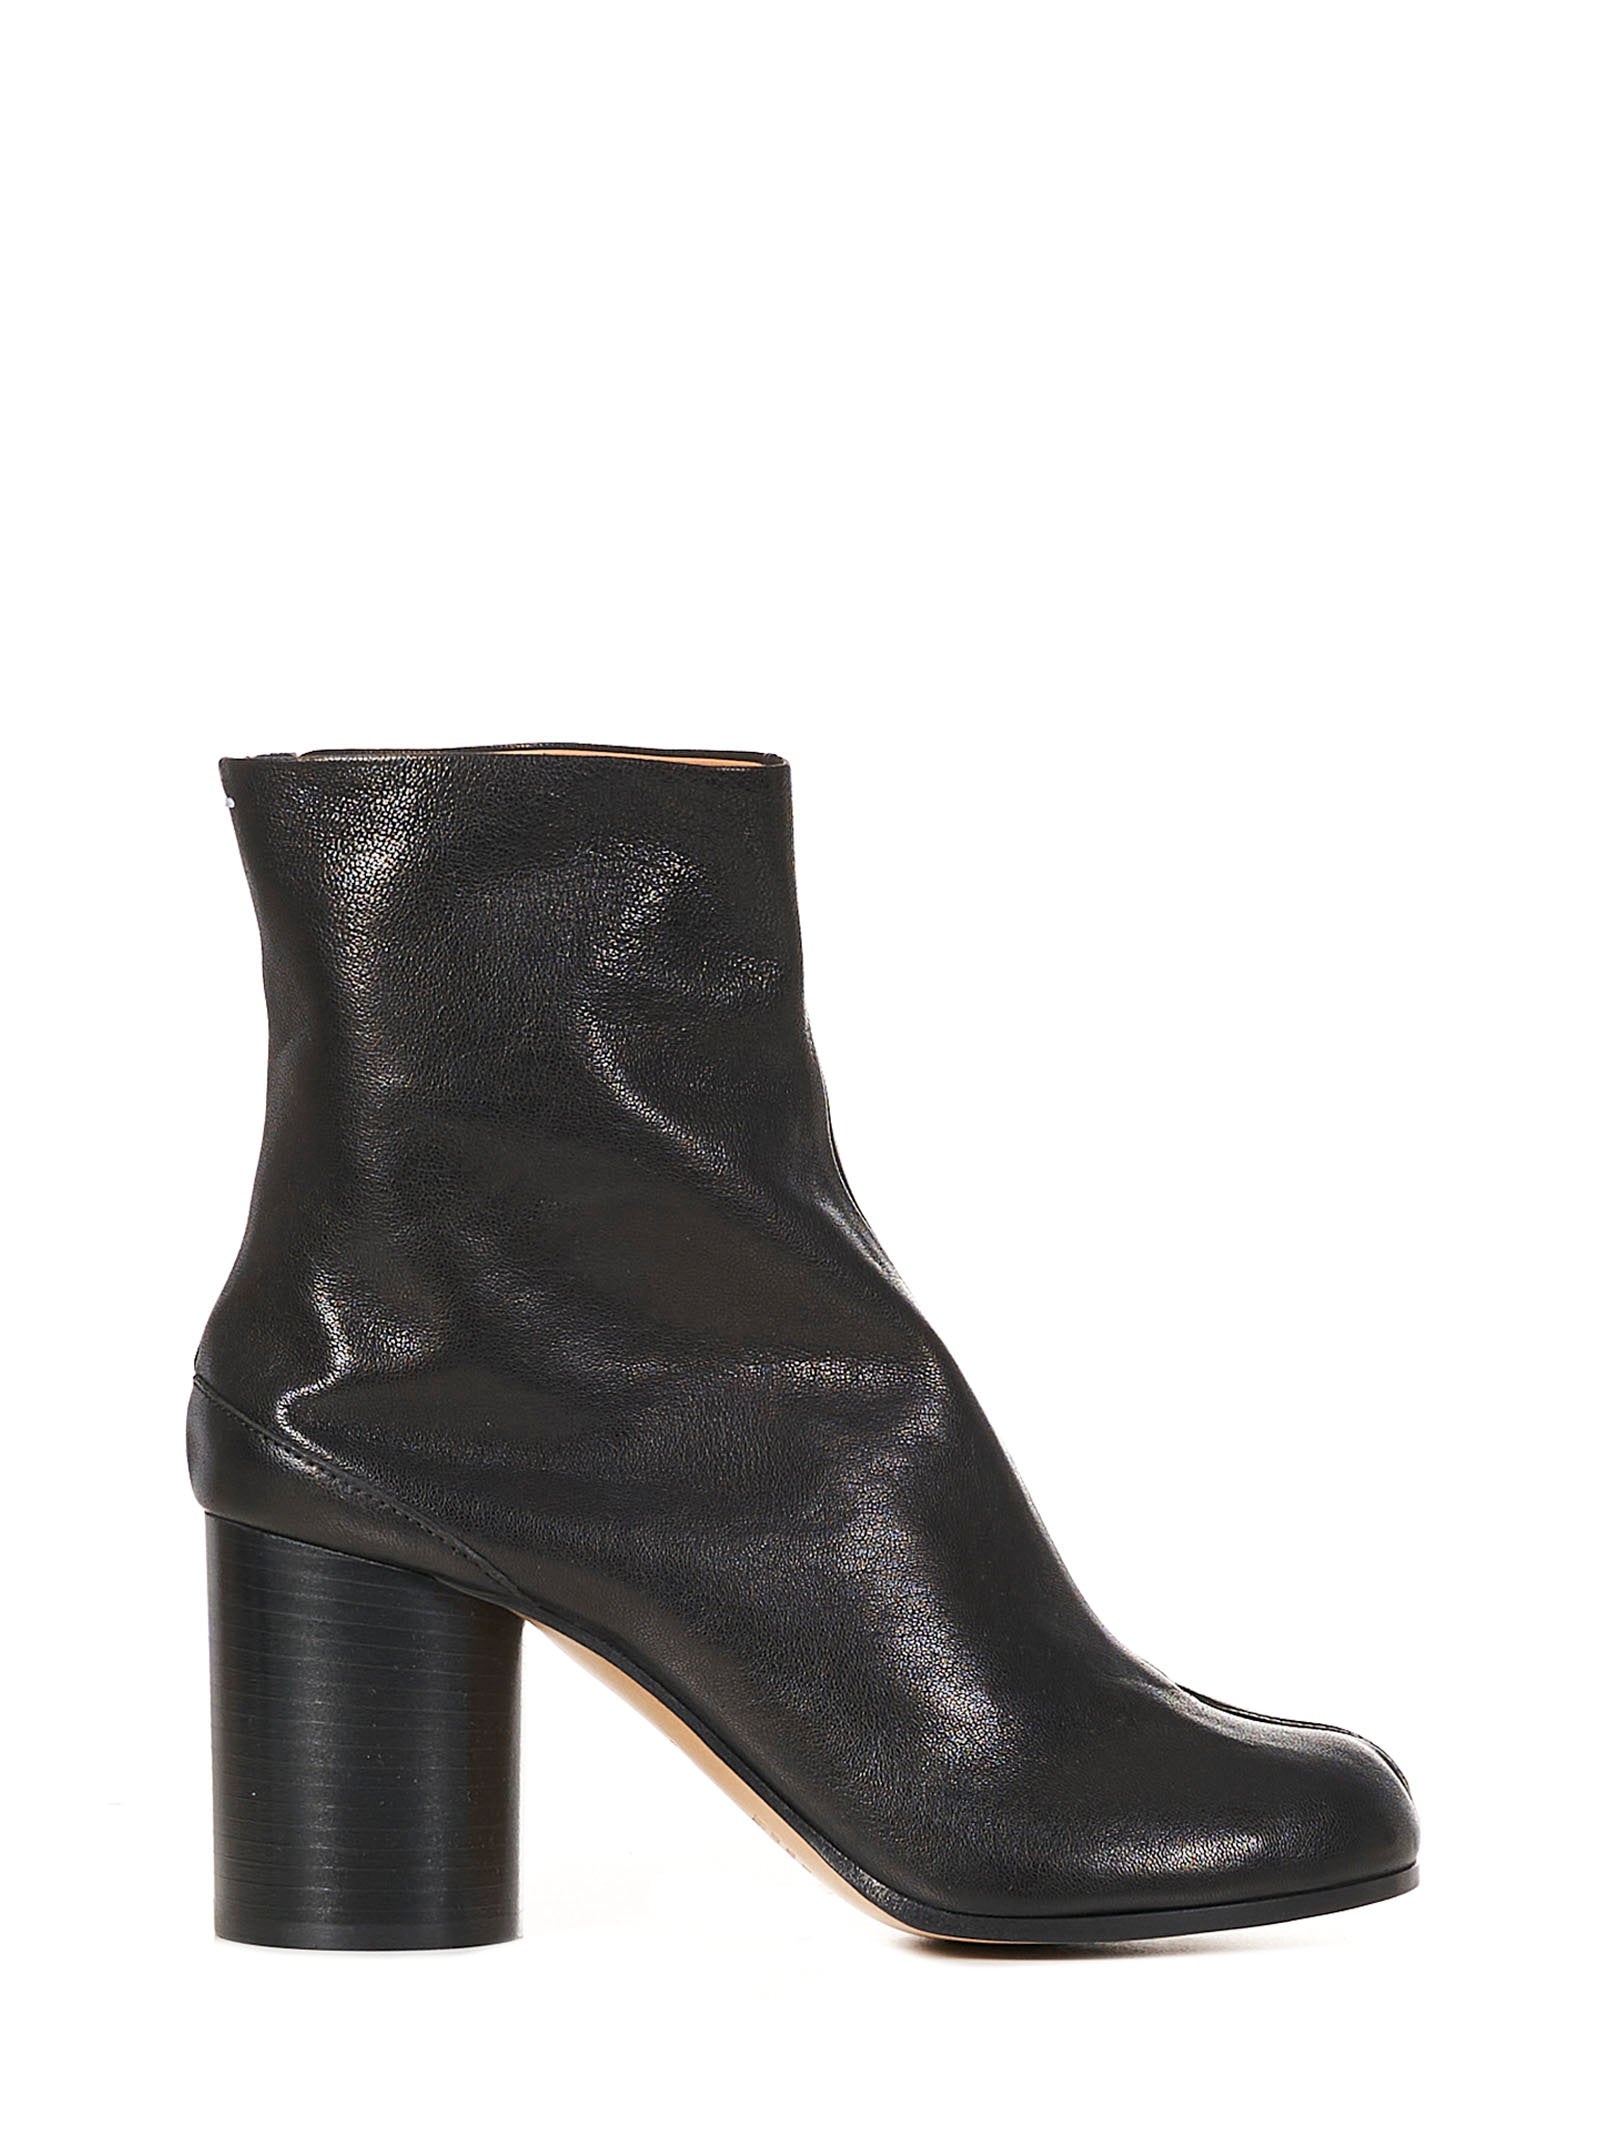 Black vintage leather ankle boots with Tabi split-toe and cylindrical heel. - 1